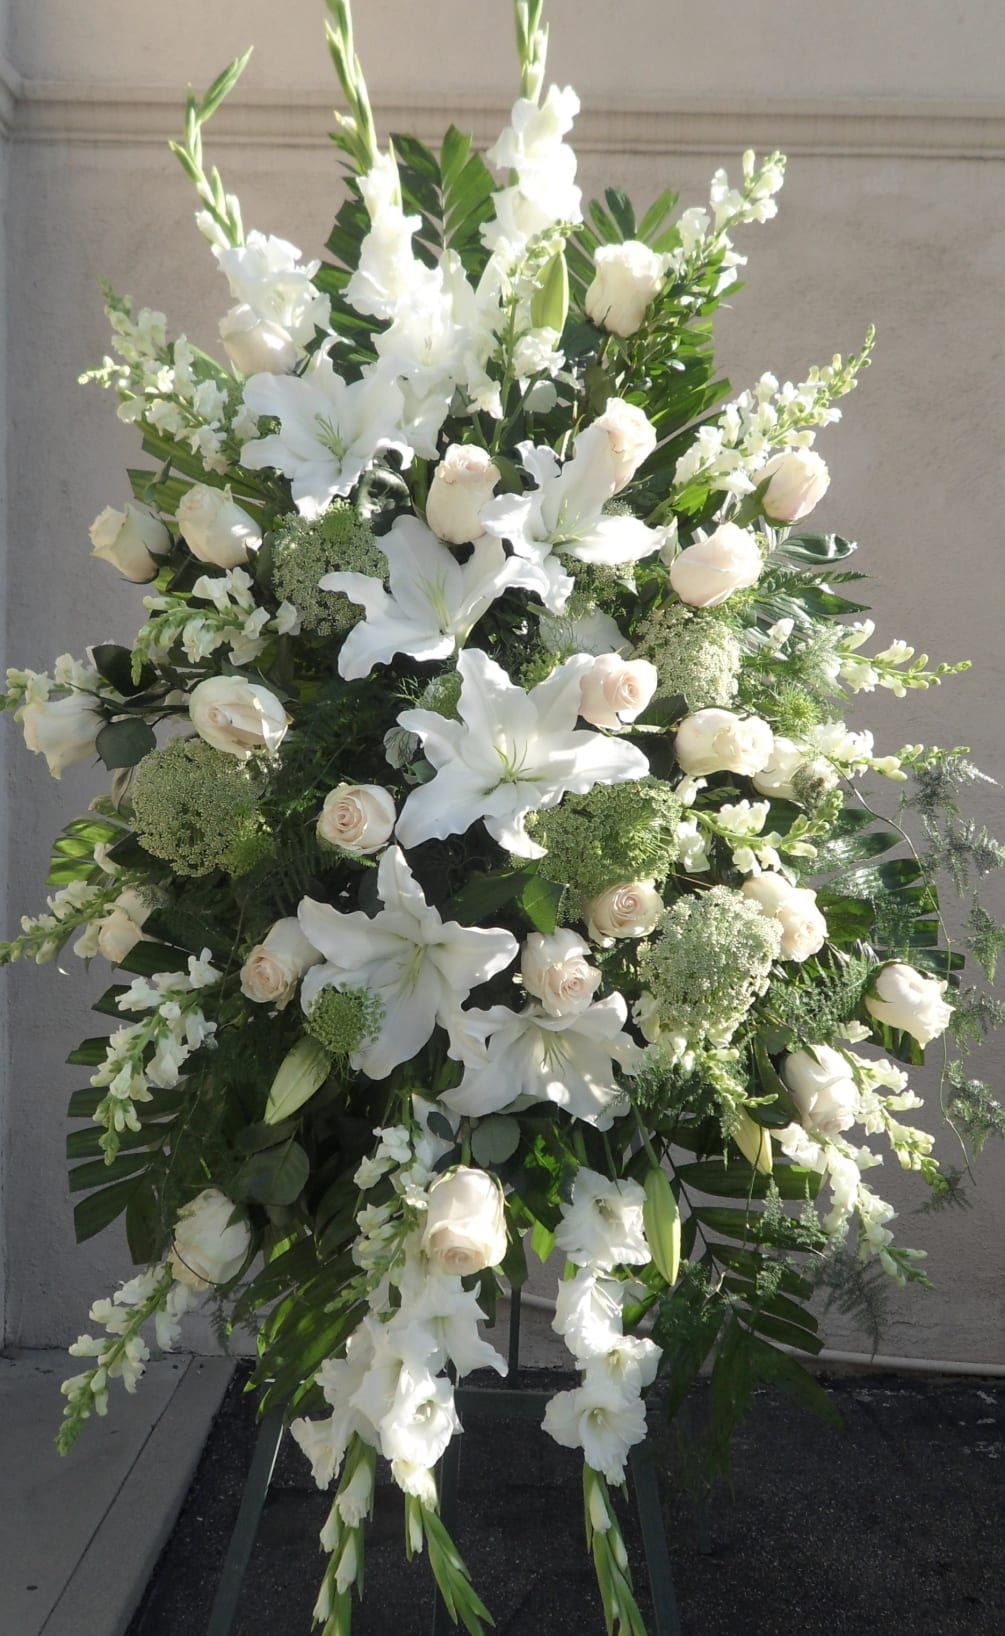 Graceful and elegant, this all-white standing spray is a timeless tribute to